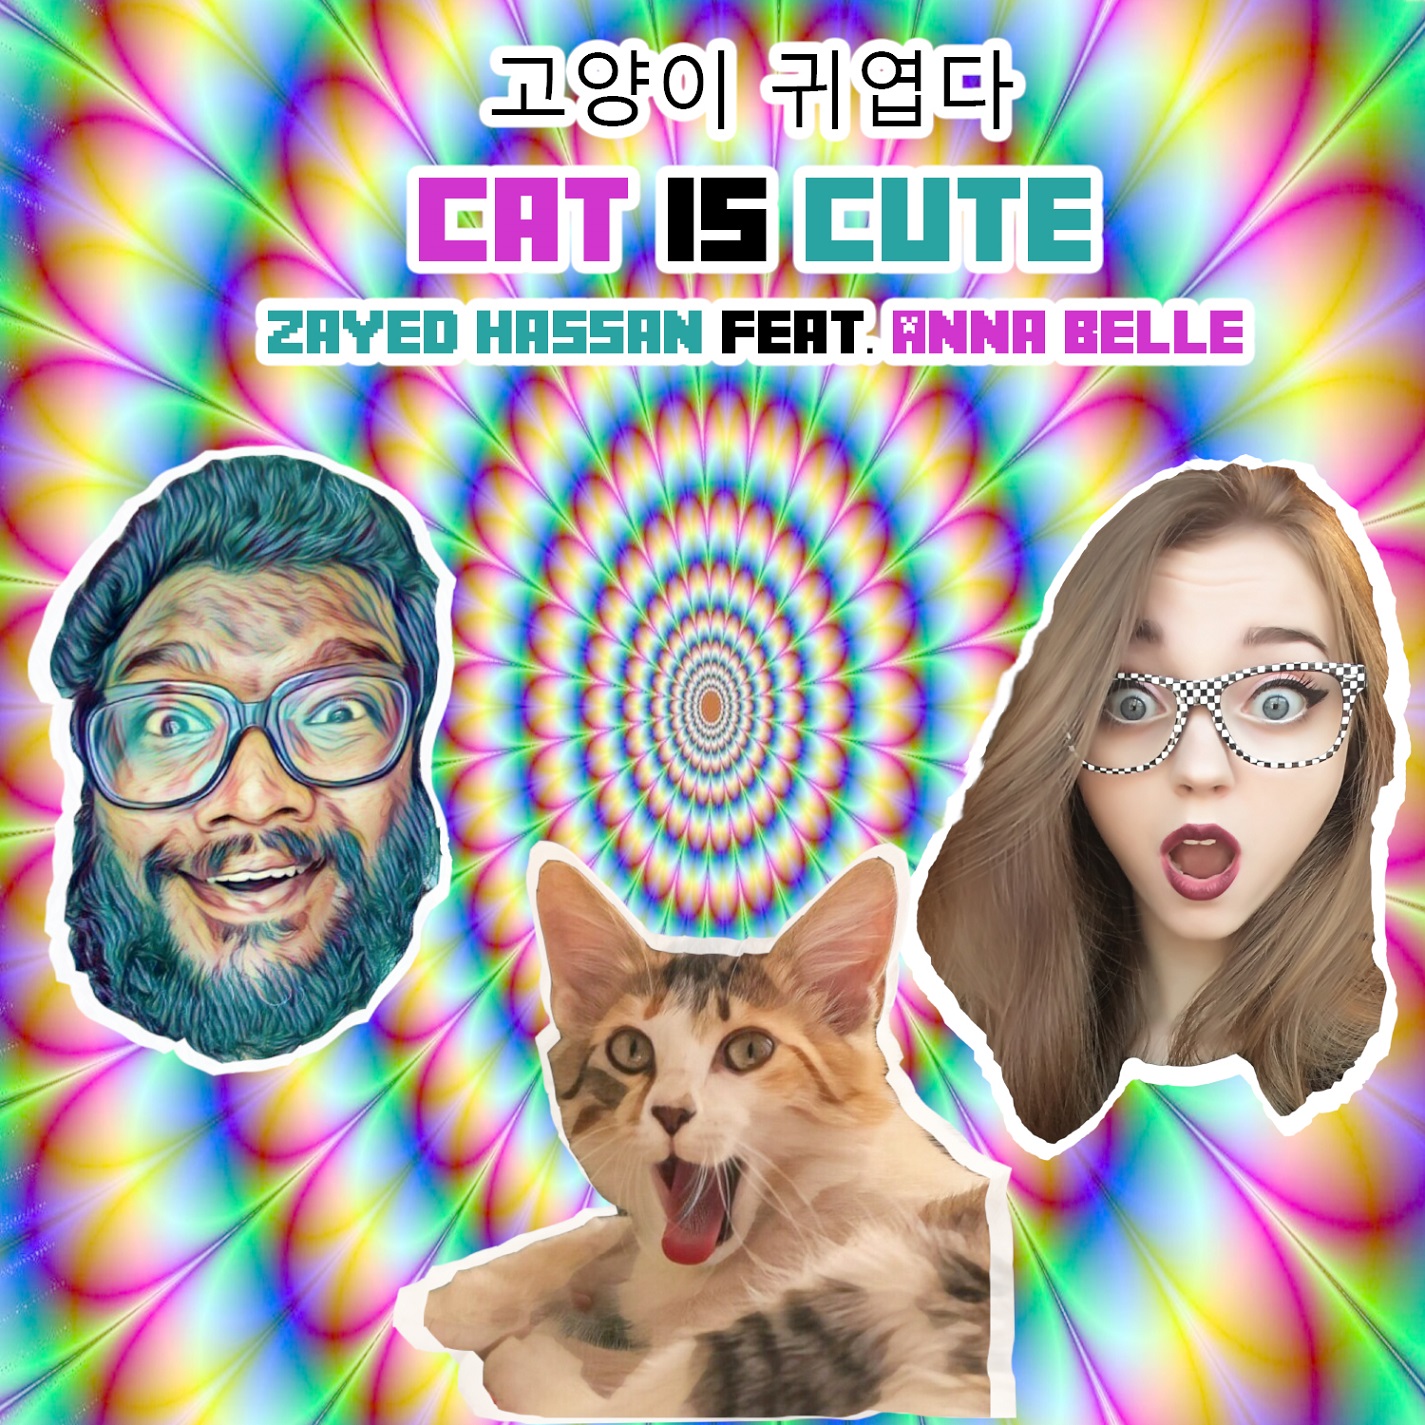  Zayed Hassan – “Cat Is Cute” Feat. Anna Belle